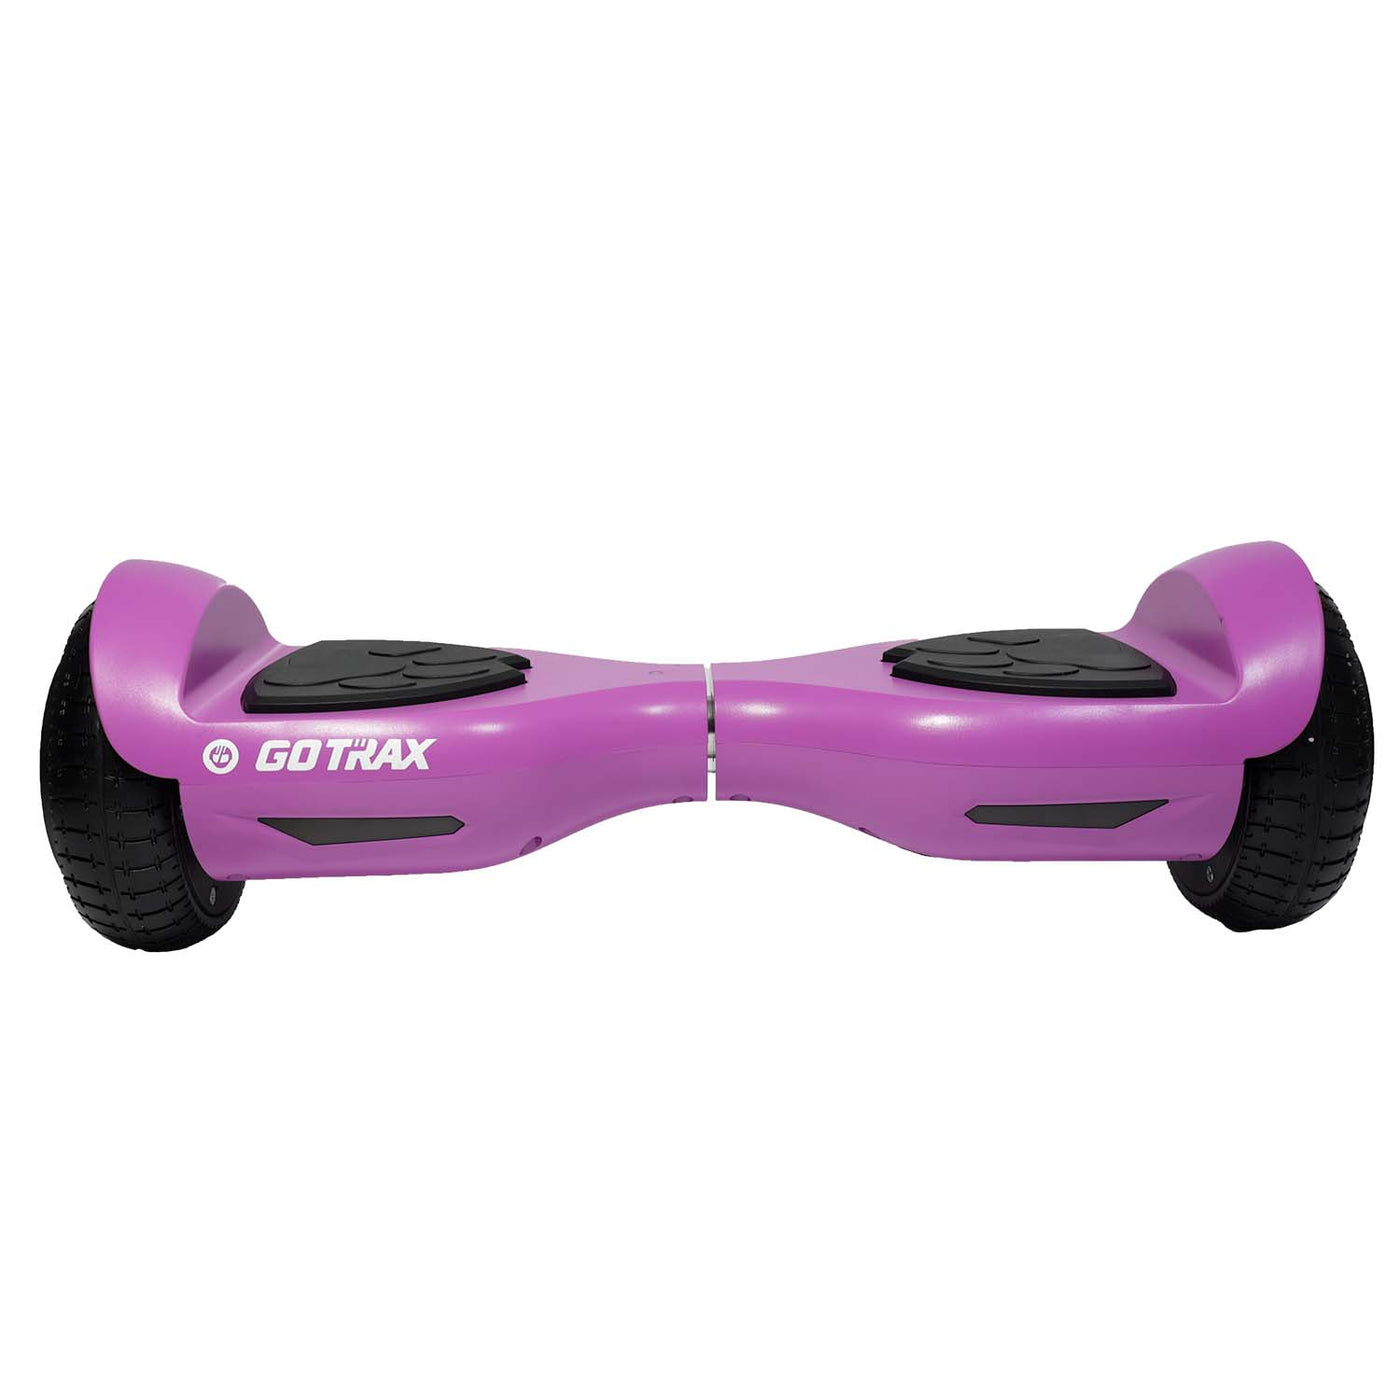 Lil Cub Hoverboard For Kids 6.5" - GOTRAX